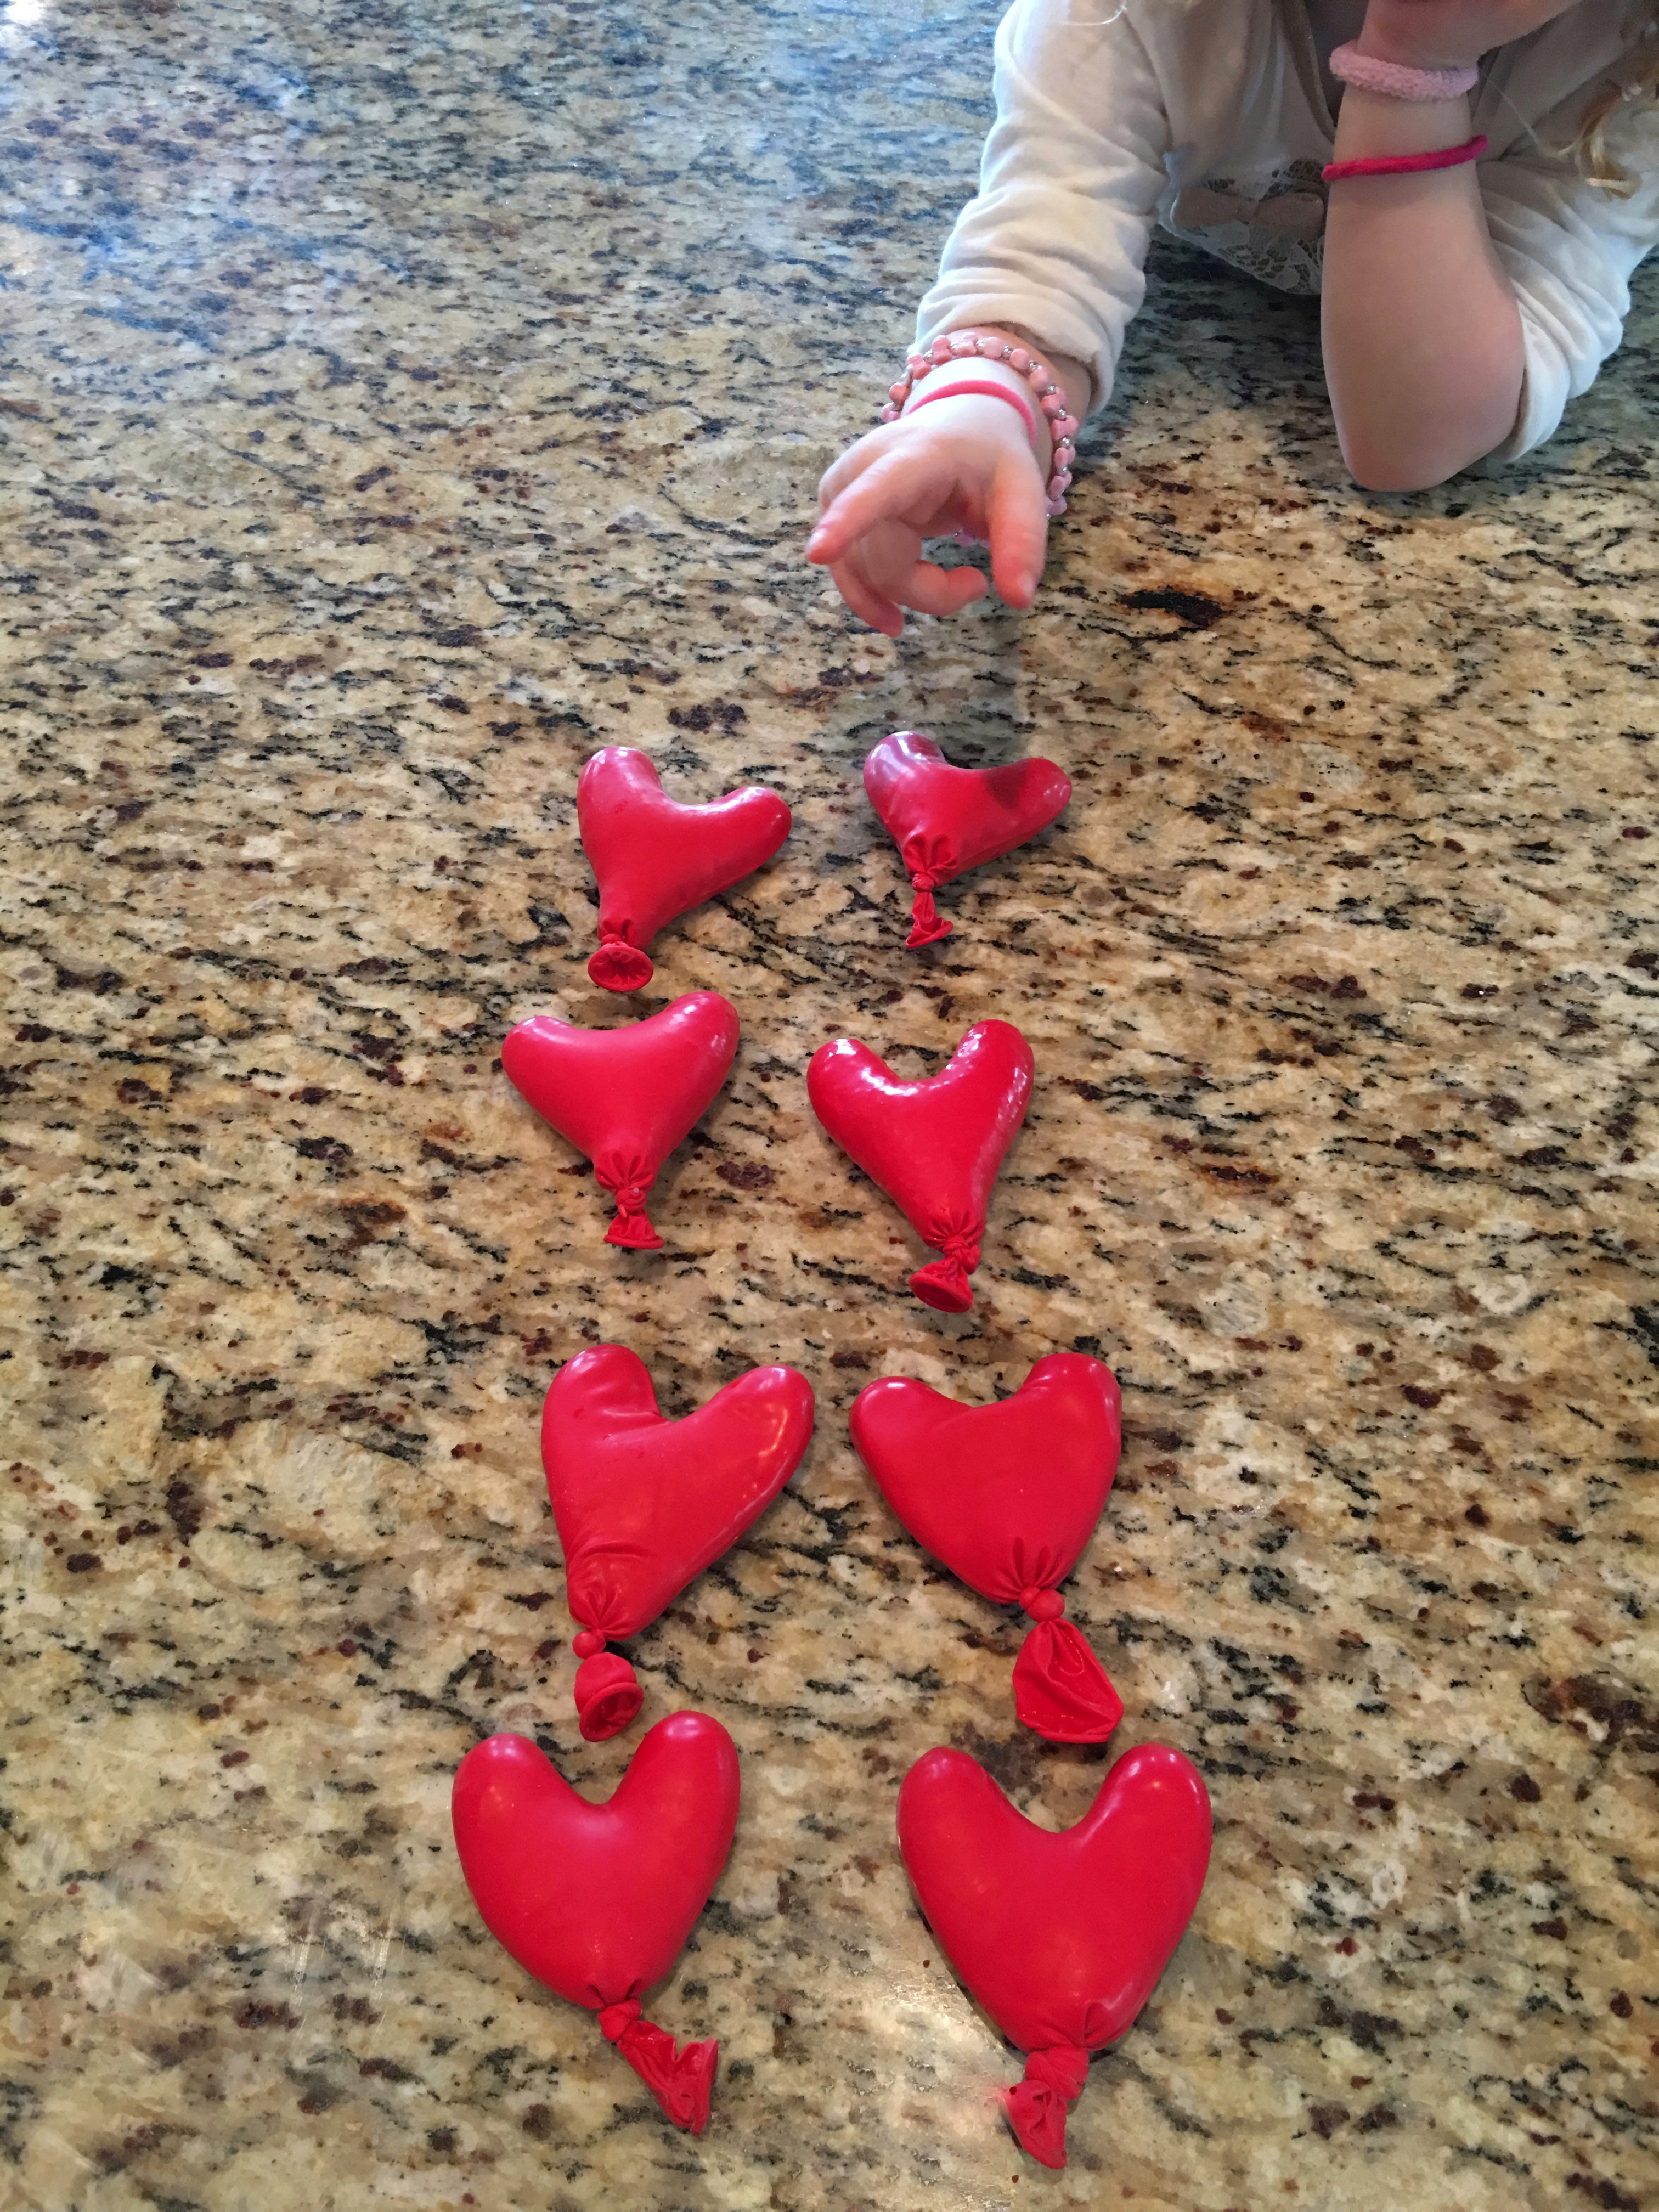 Sensory Hearts made from balloons with simple ingredients you might find already in your kitchen. Makes for a fantastic sensory play activity for your children. These heart balloons are perfect for a simple and fun Valentines Day activity.